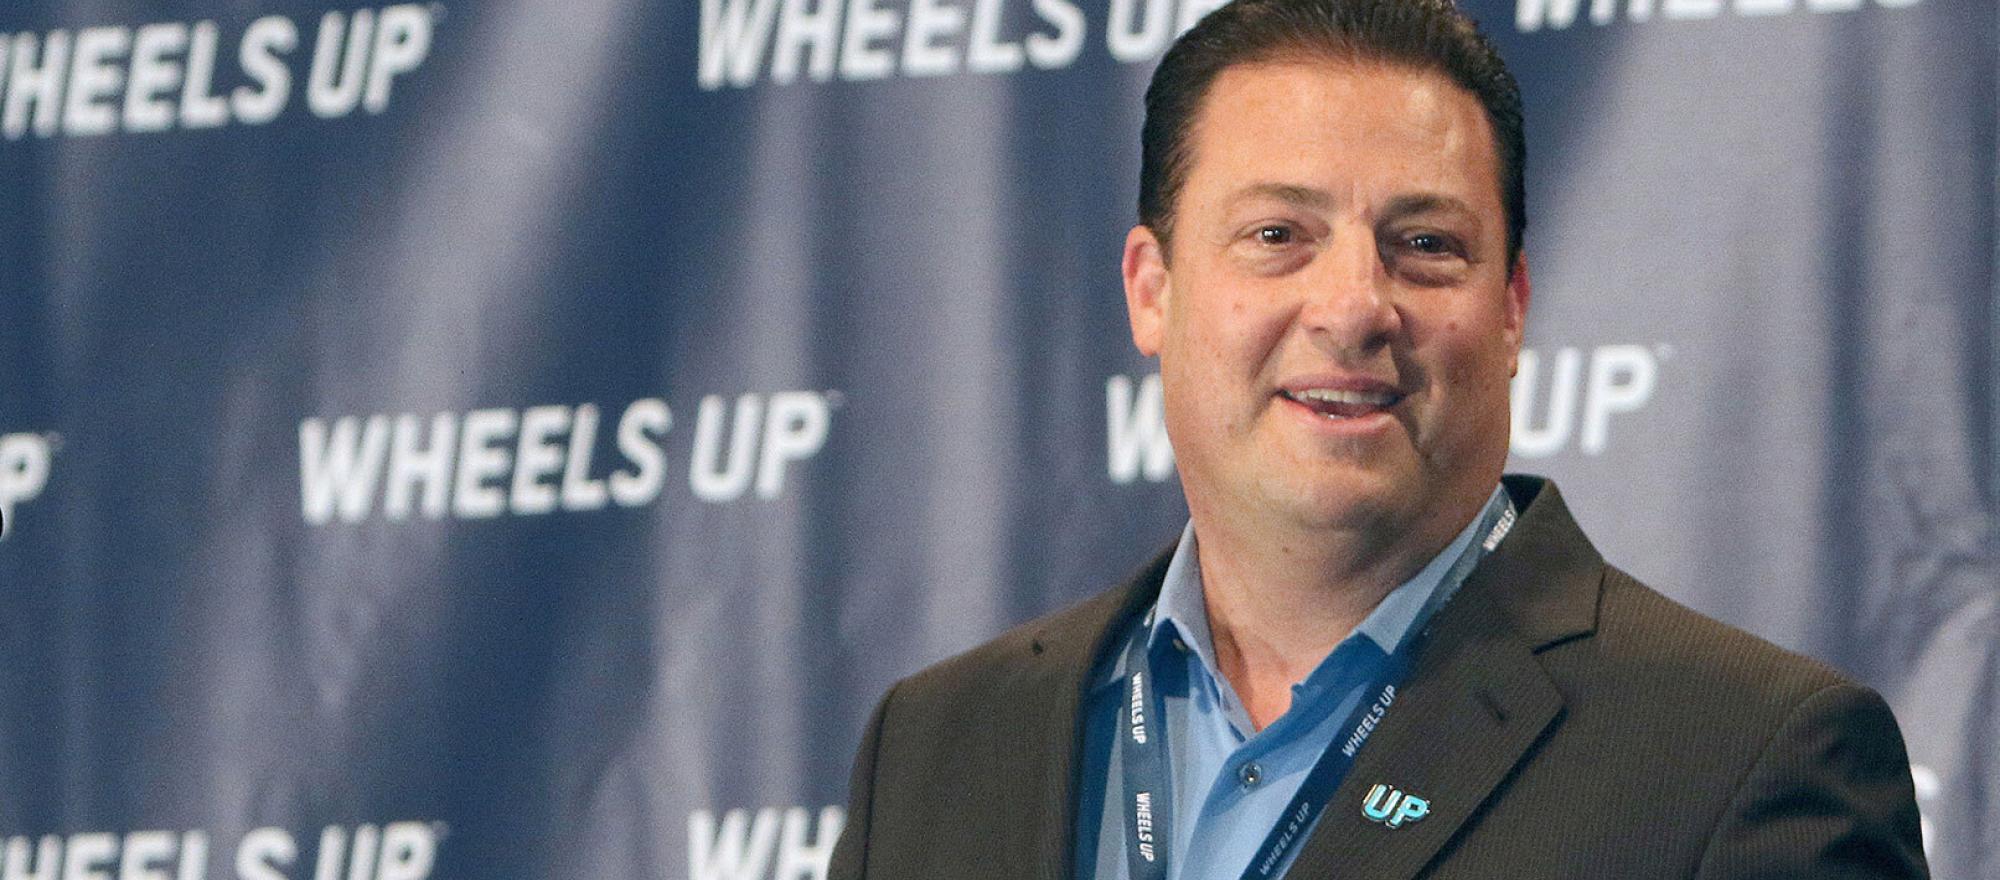 Wheels Up founder Kenny Dichter